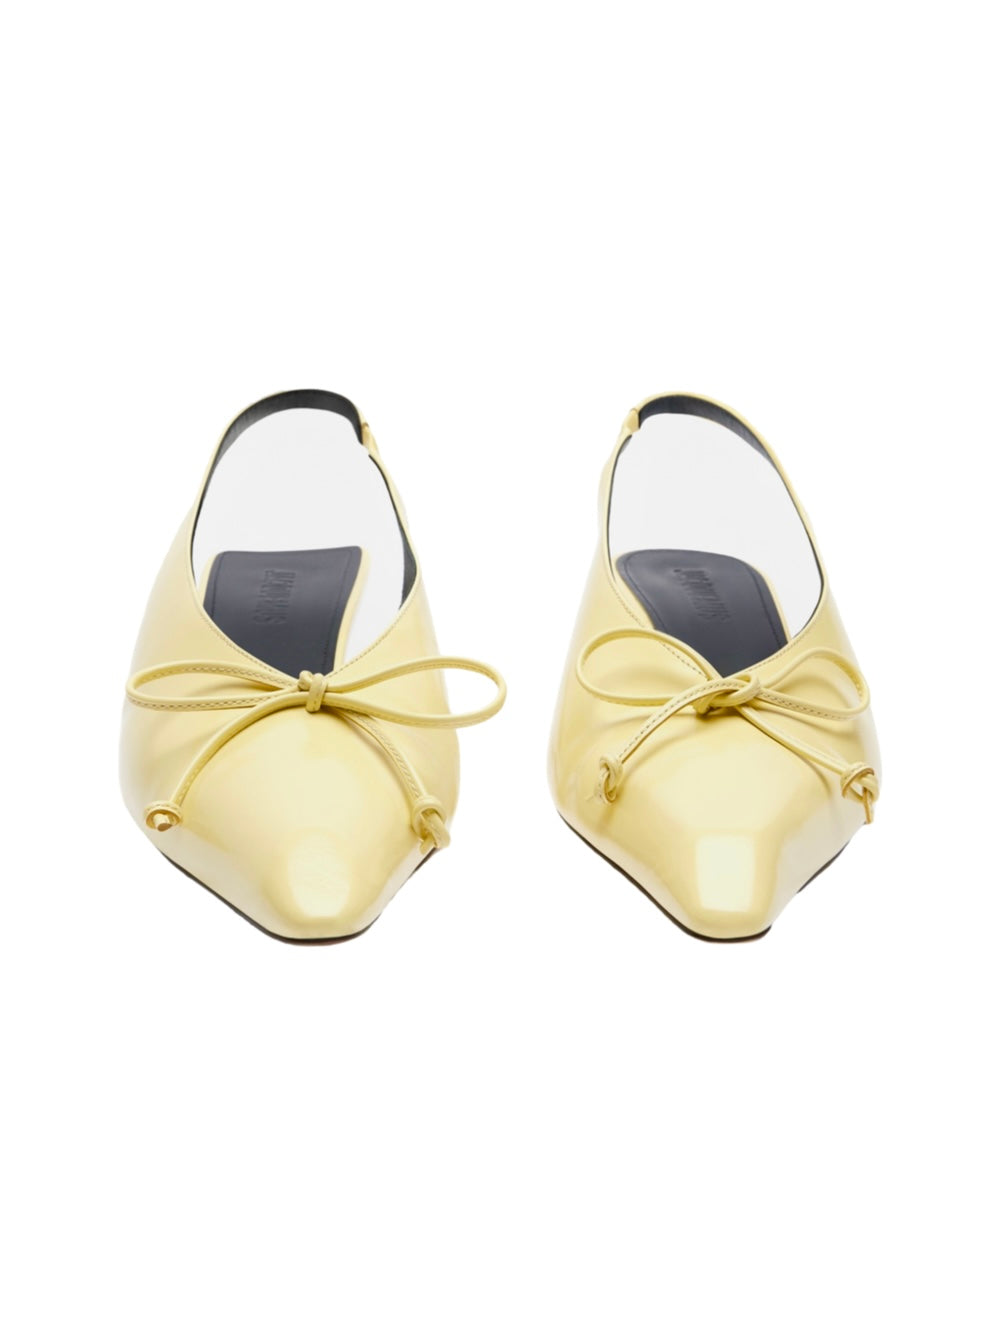 Jacquemus Les Slingbacks Cubisto Basses in Pale Yellow 205